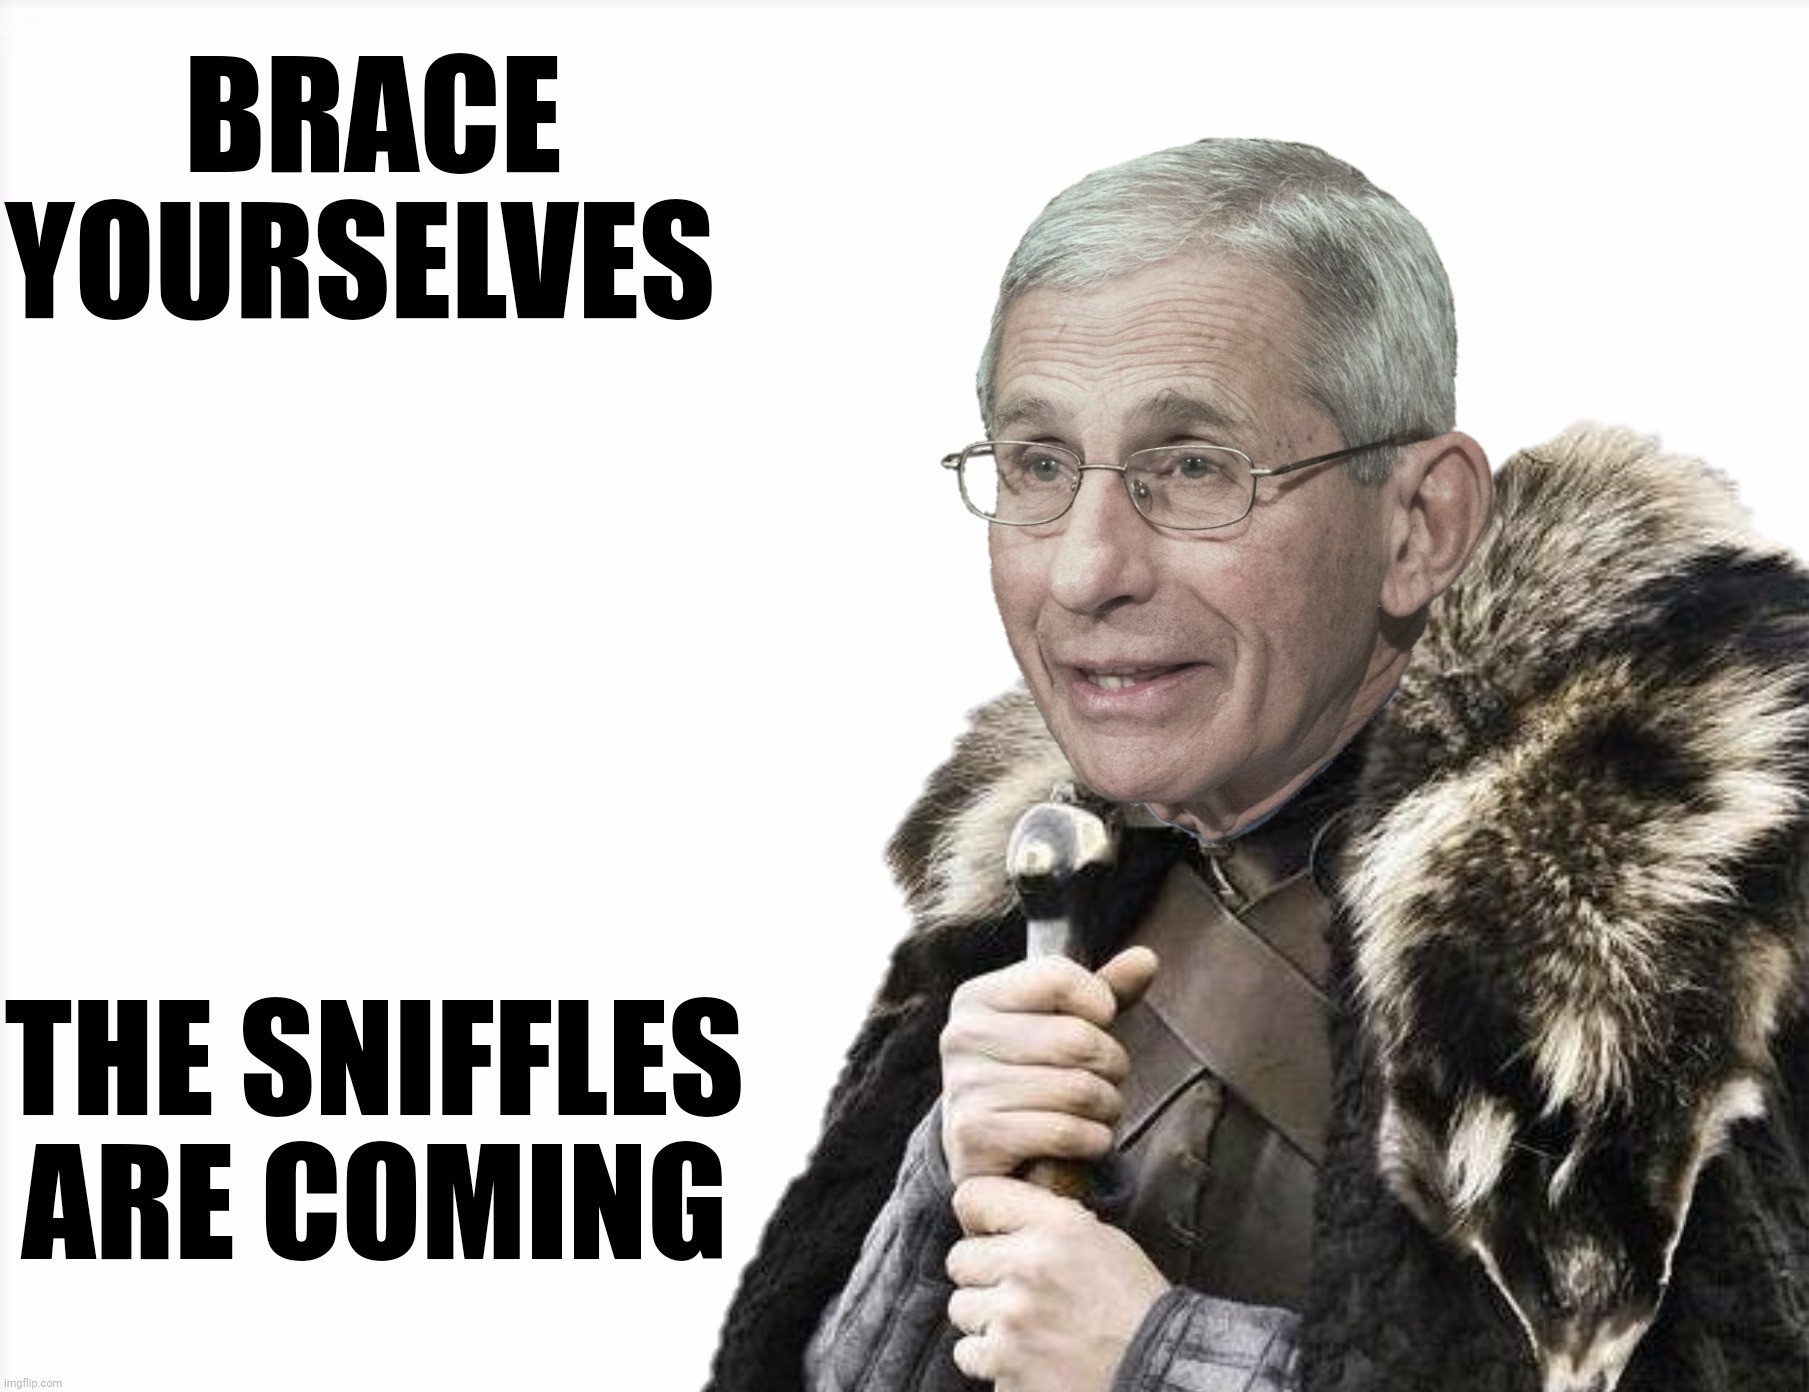 BRACE YOURSELVES THE SNIFFLES ARE COMING | made w/ Imgflip meme maker